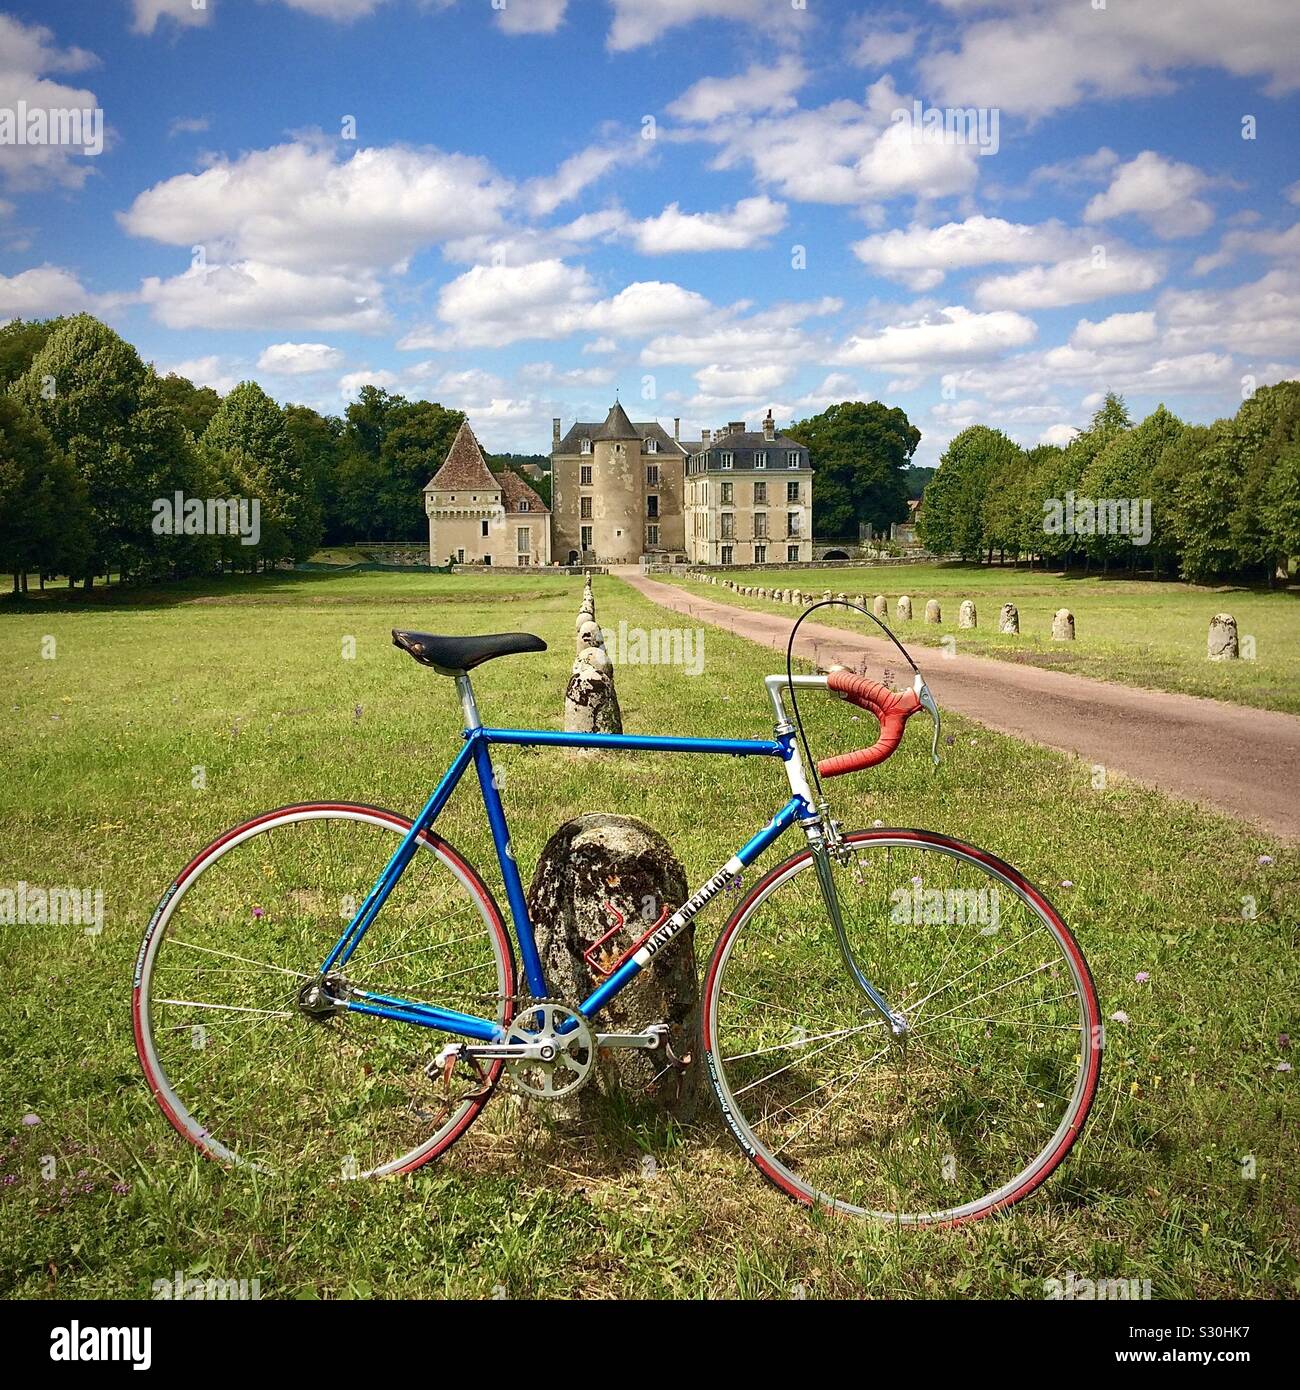 My fixed-gear bike on the approach driveway to the local Château Boussay, Indre-et-Loire, France. Stock Photo